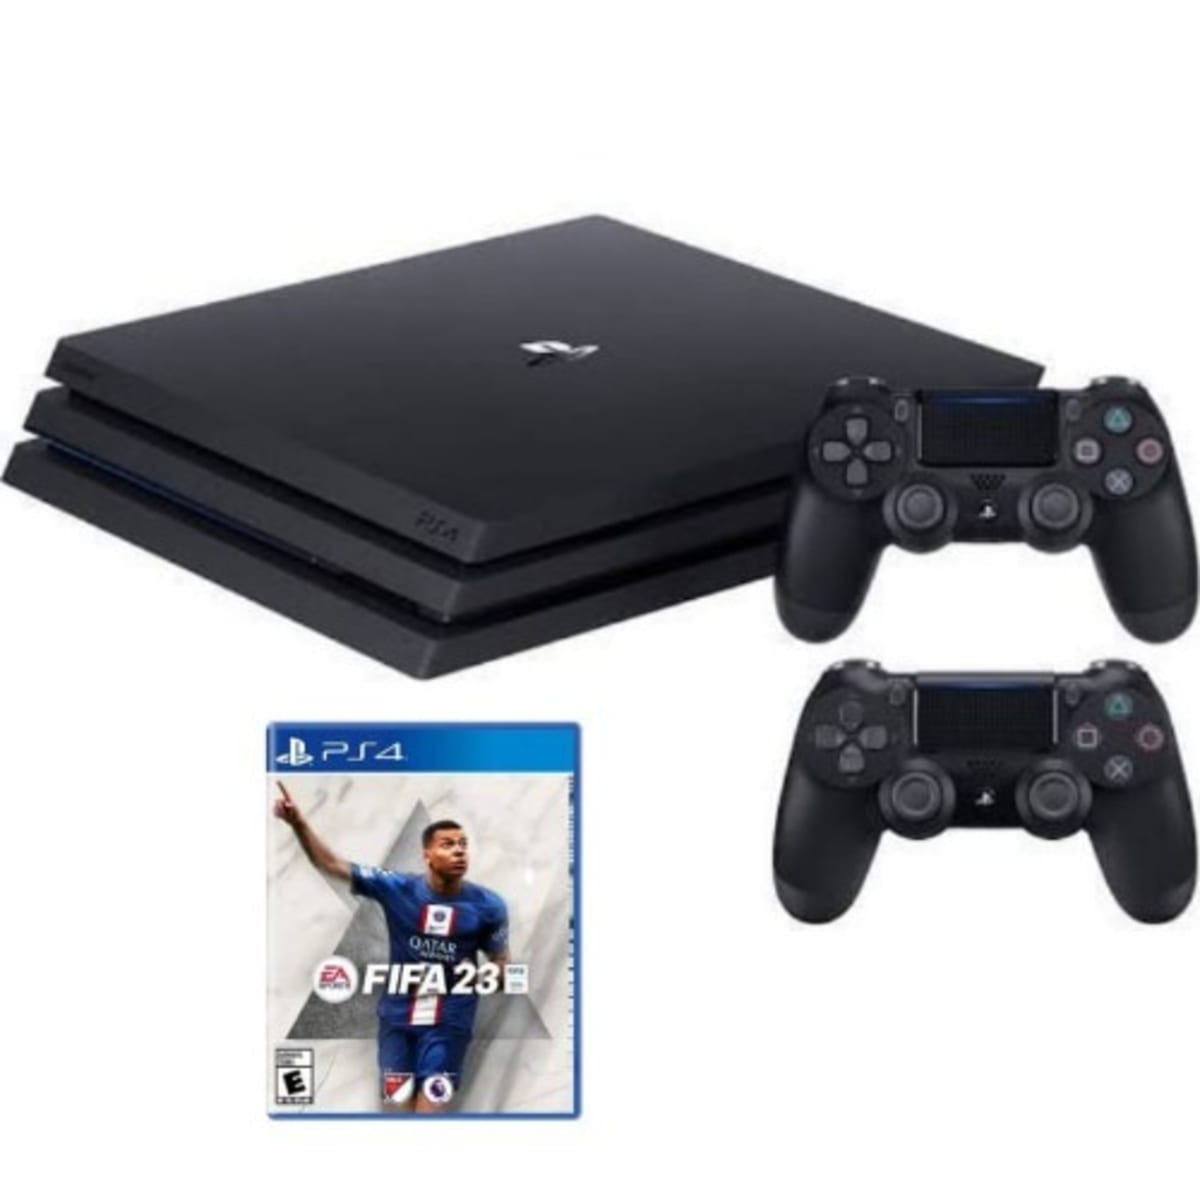 Sony Playstation 4 Pro Console With Extra Controller And Fifa 23